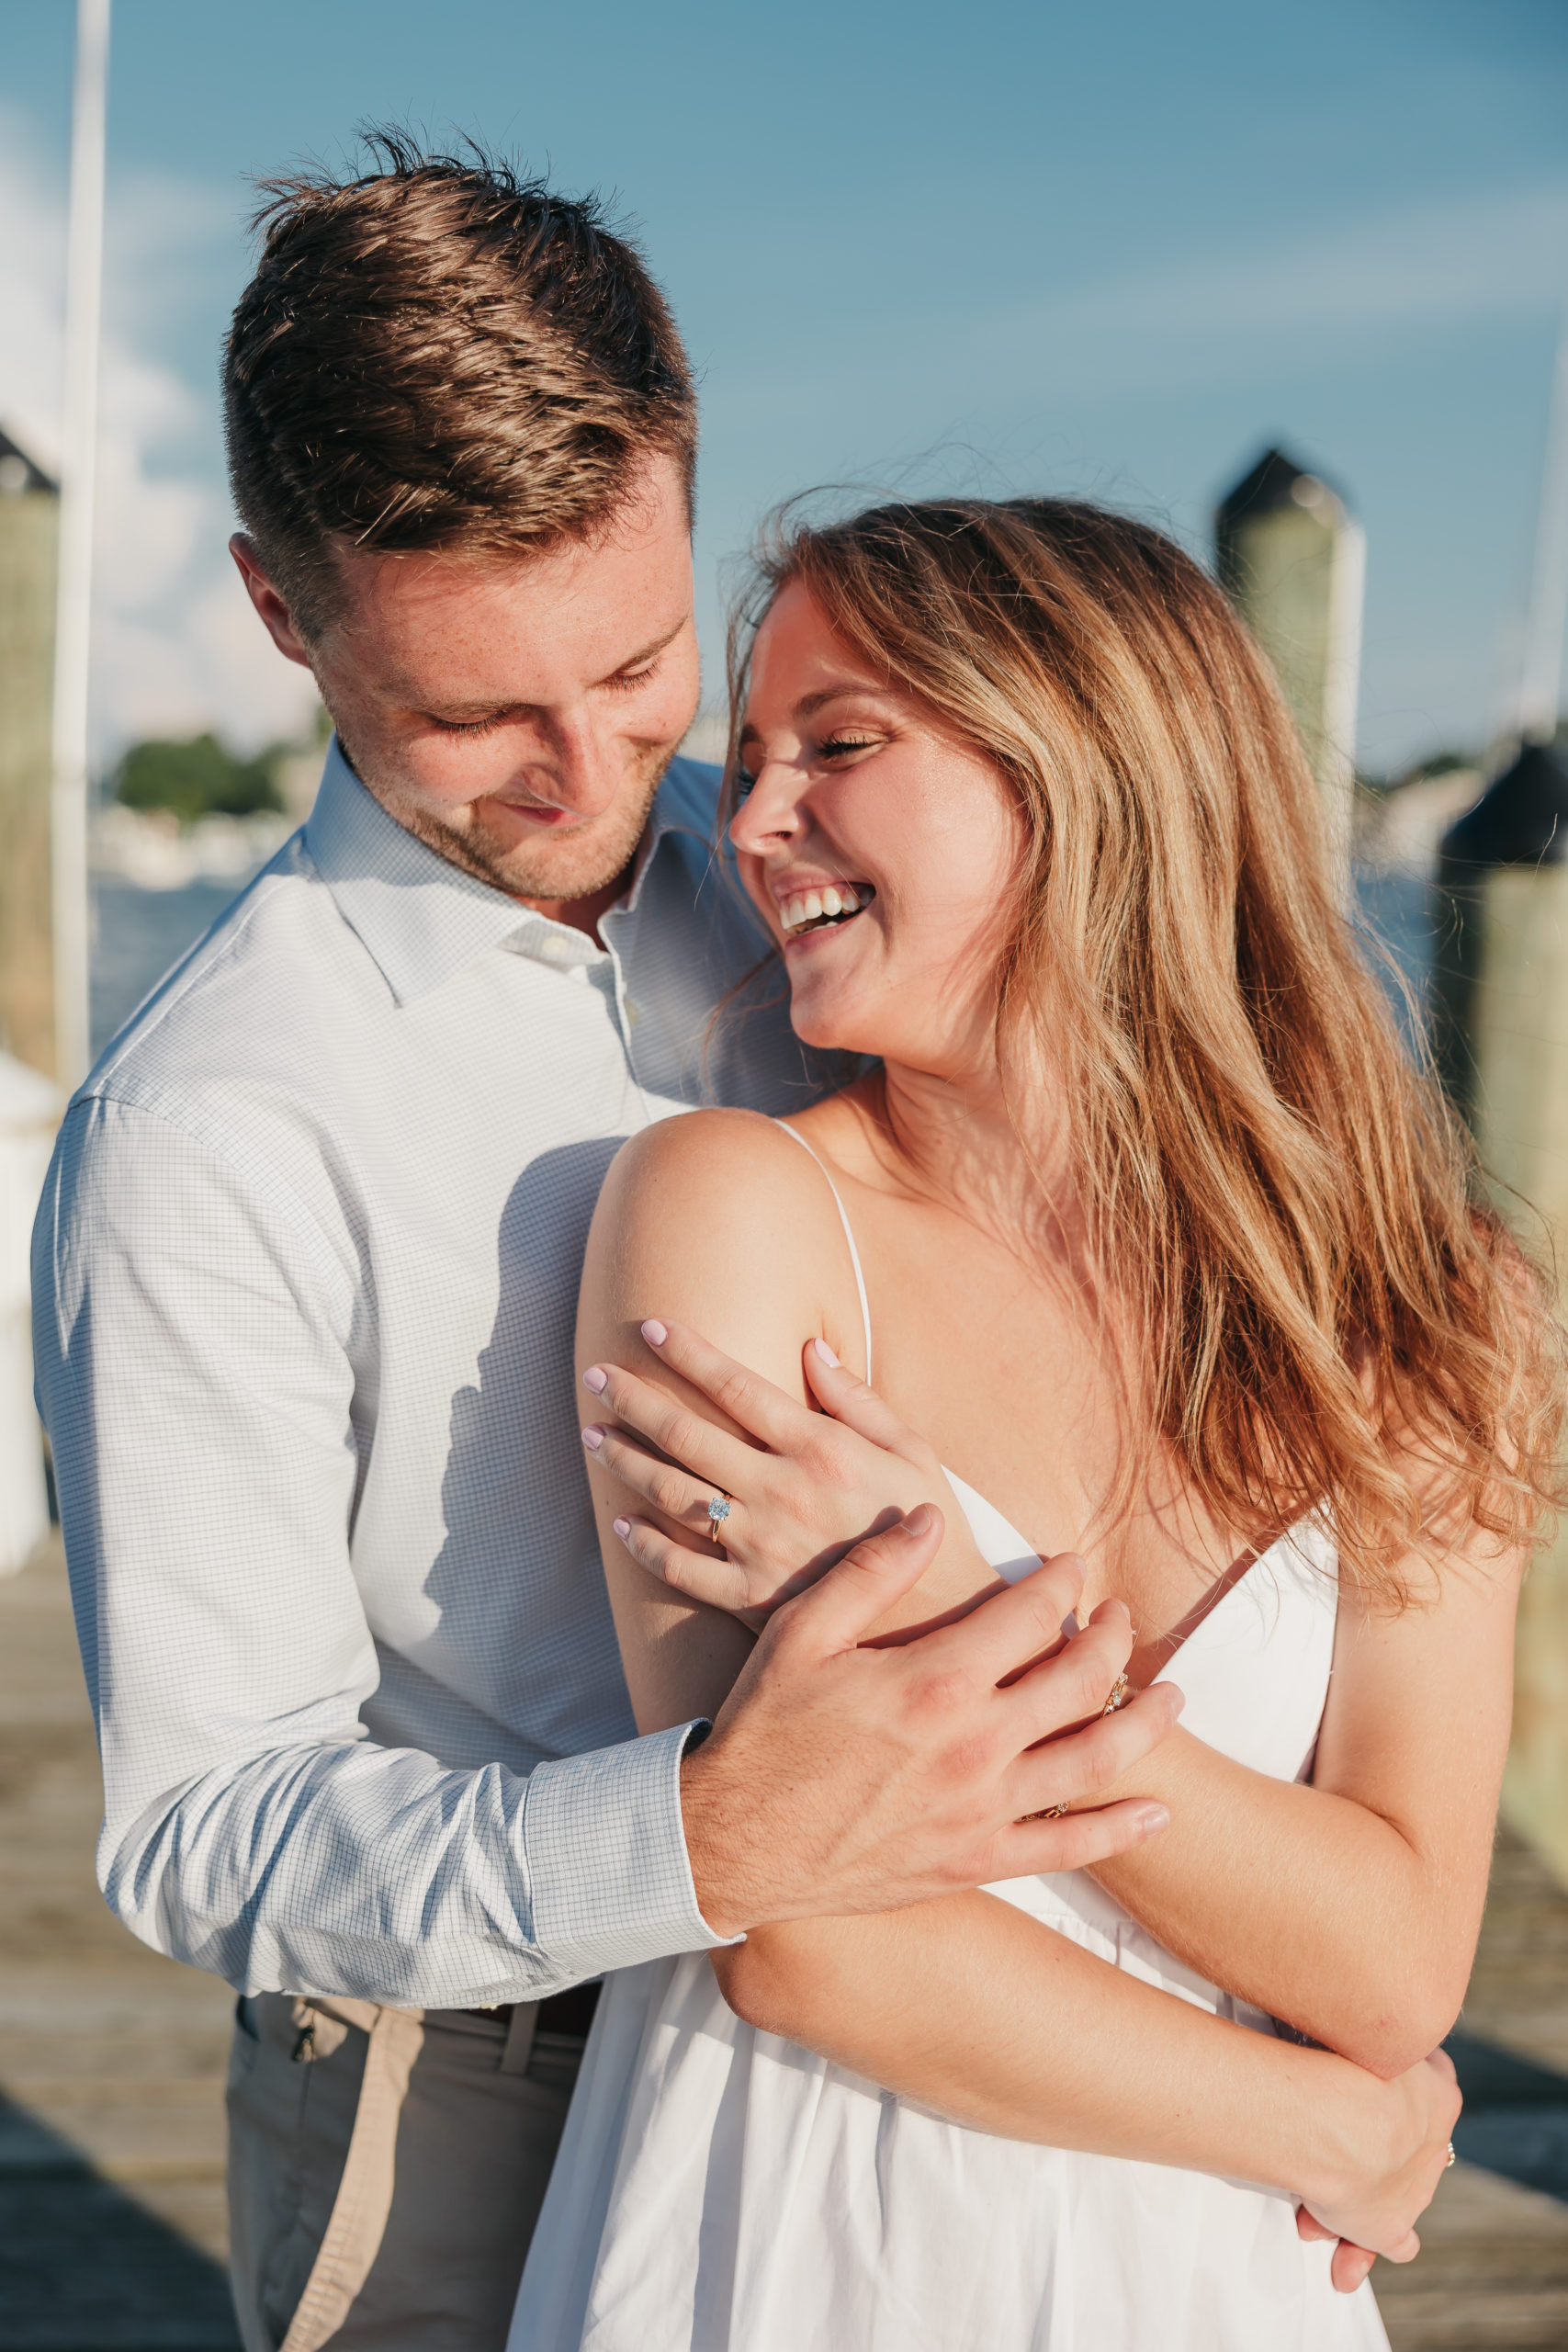 Engaged couple sharing an embrace and candidly laughing together, captured by Rachel Yearick Photography